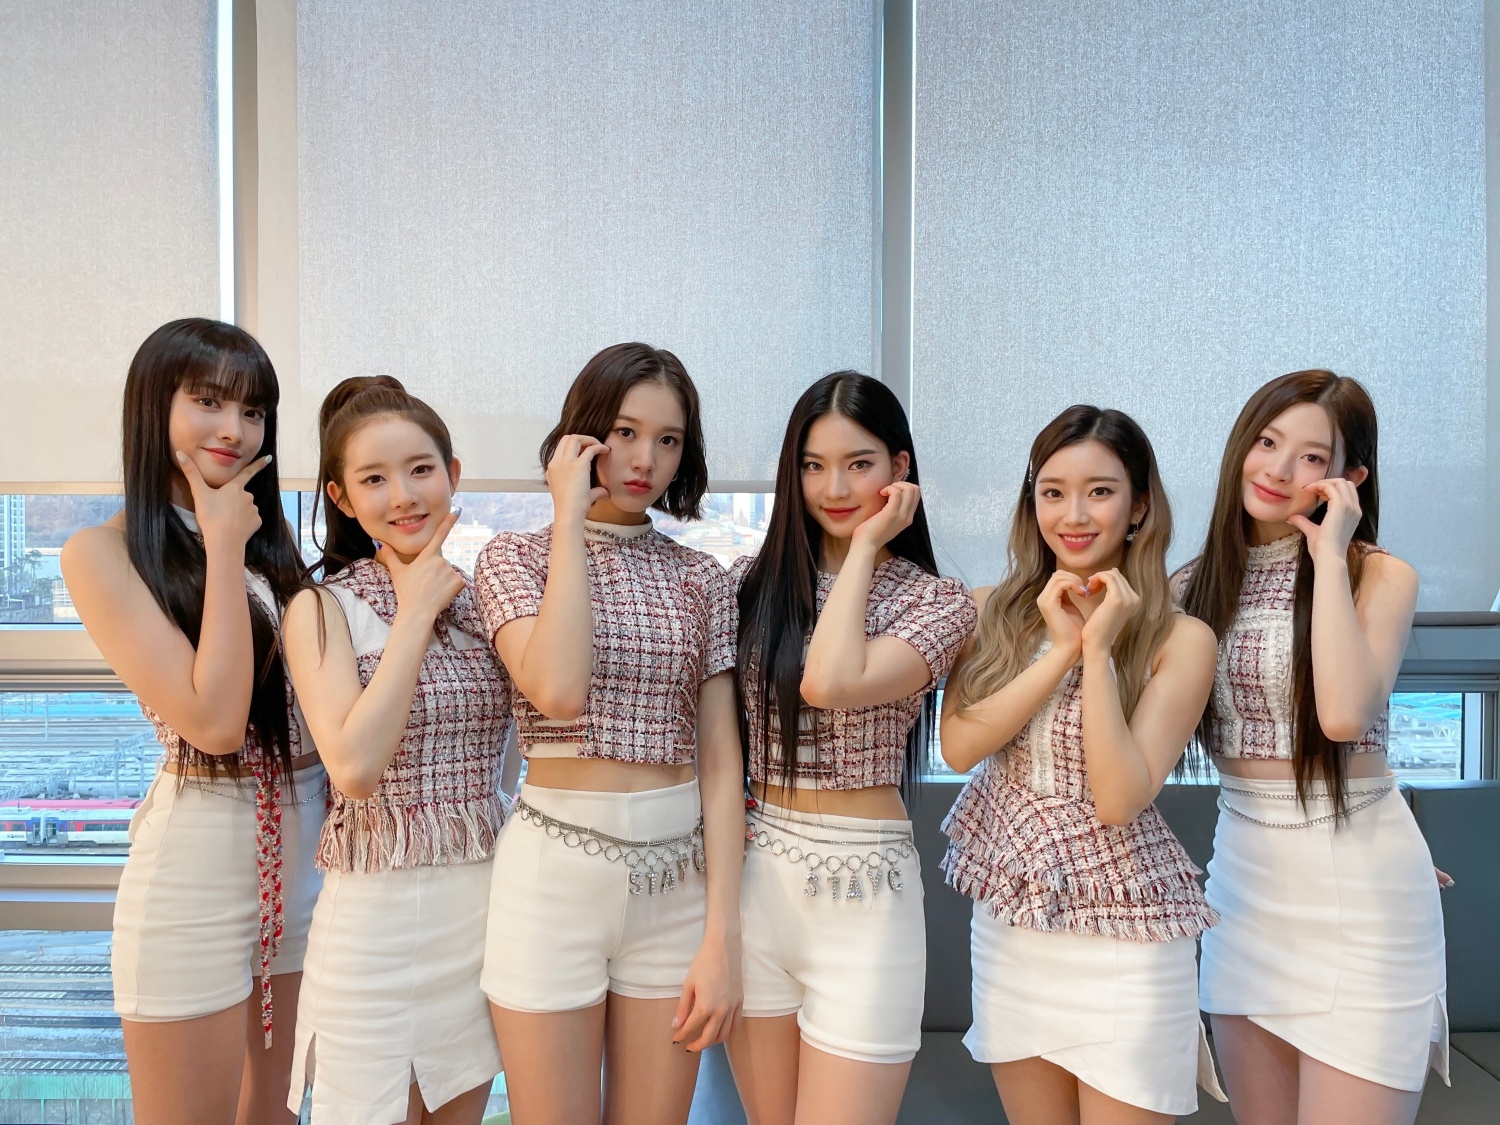 STAYC Achieves Highest Single Album Sales among New Girl Groups That